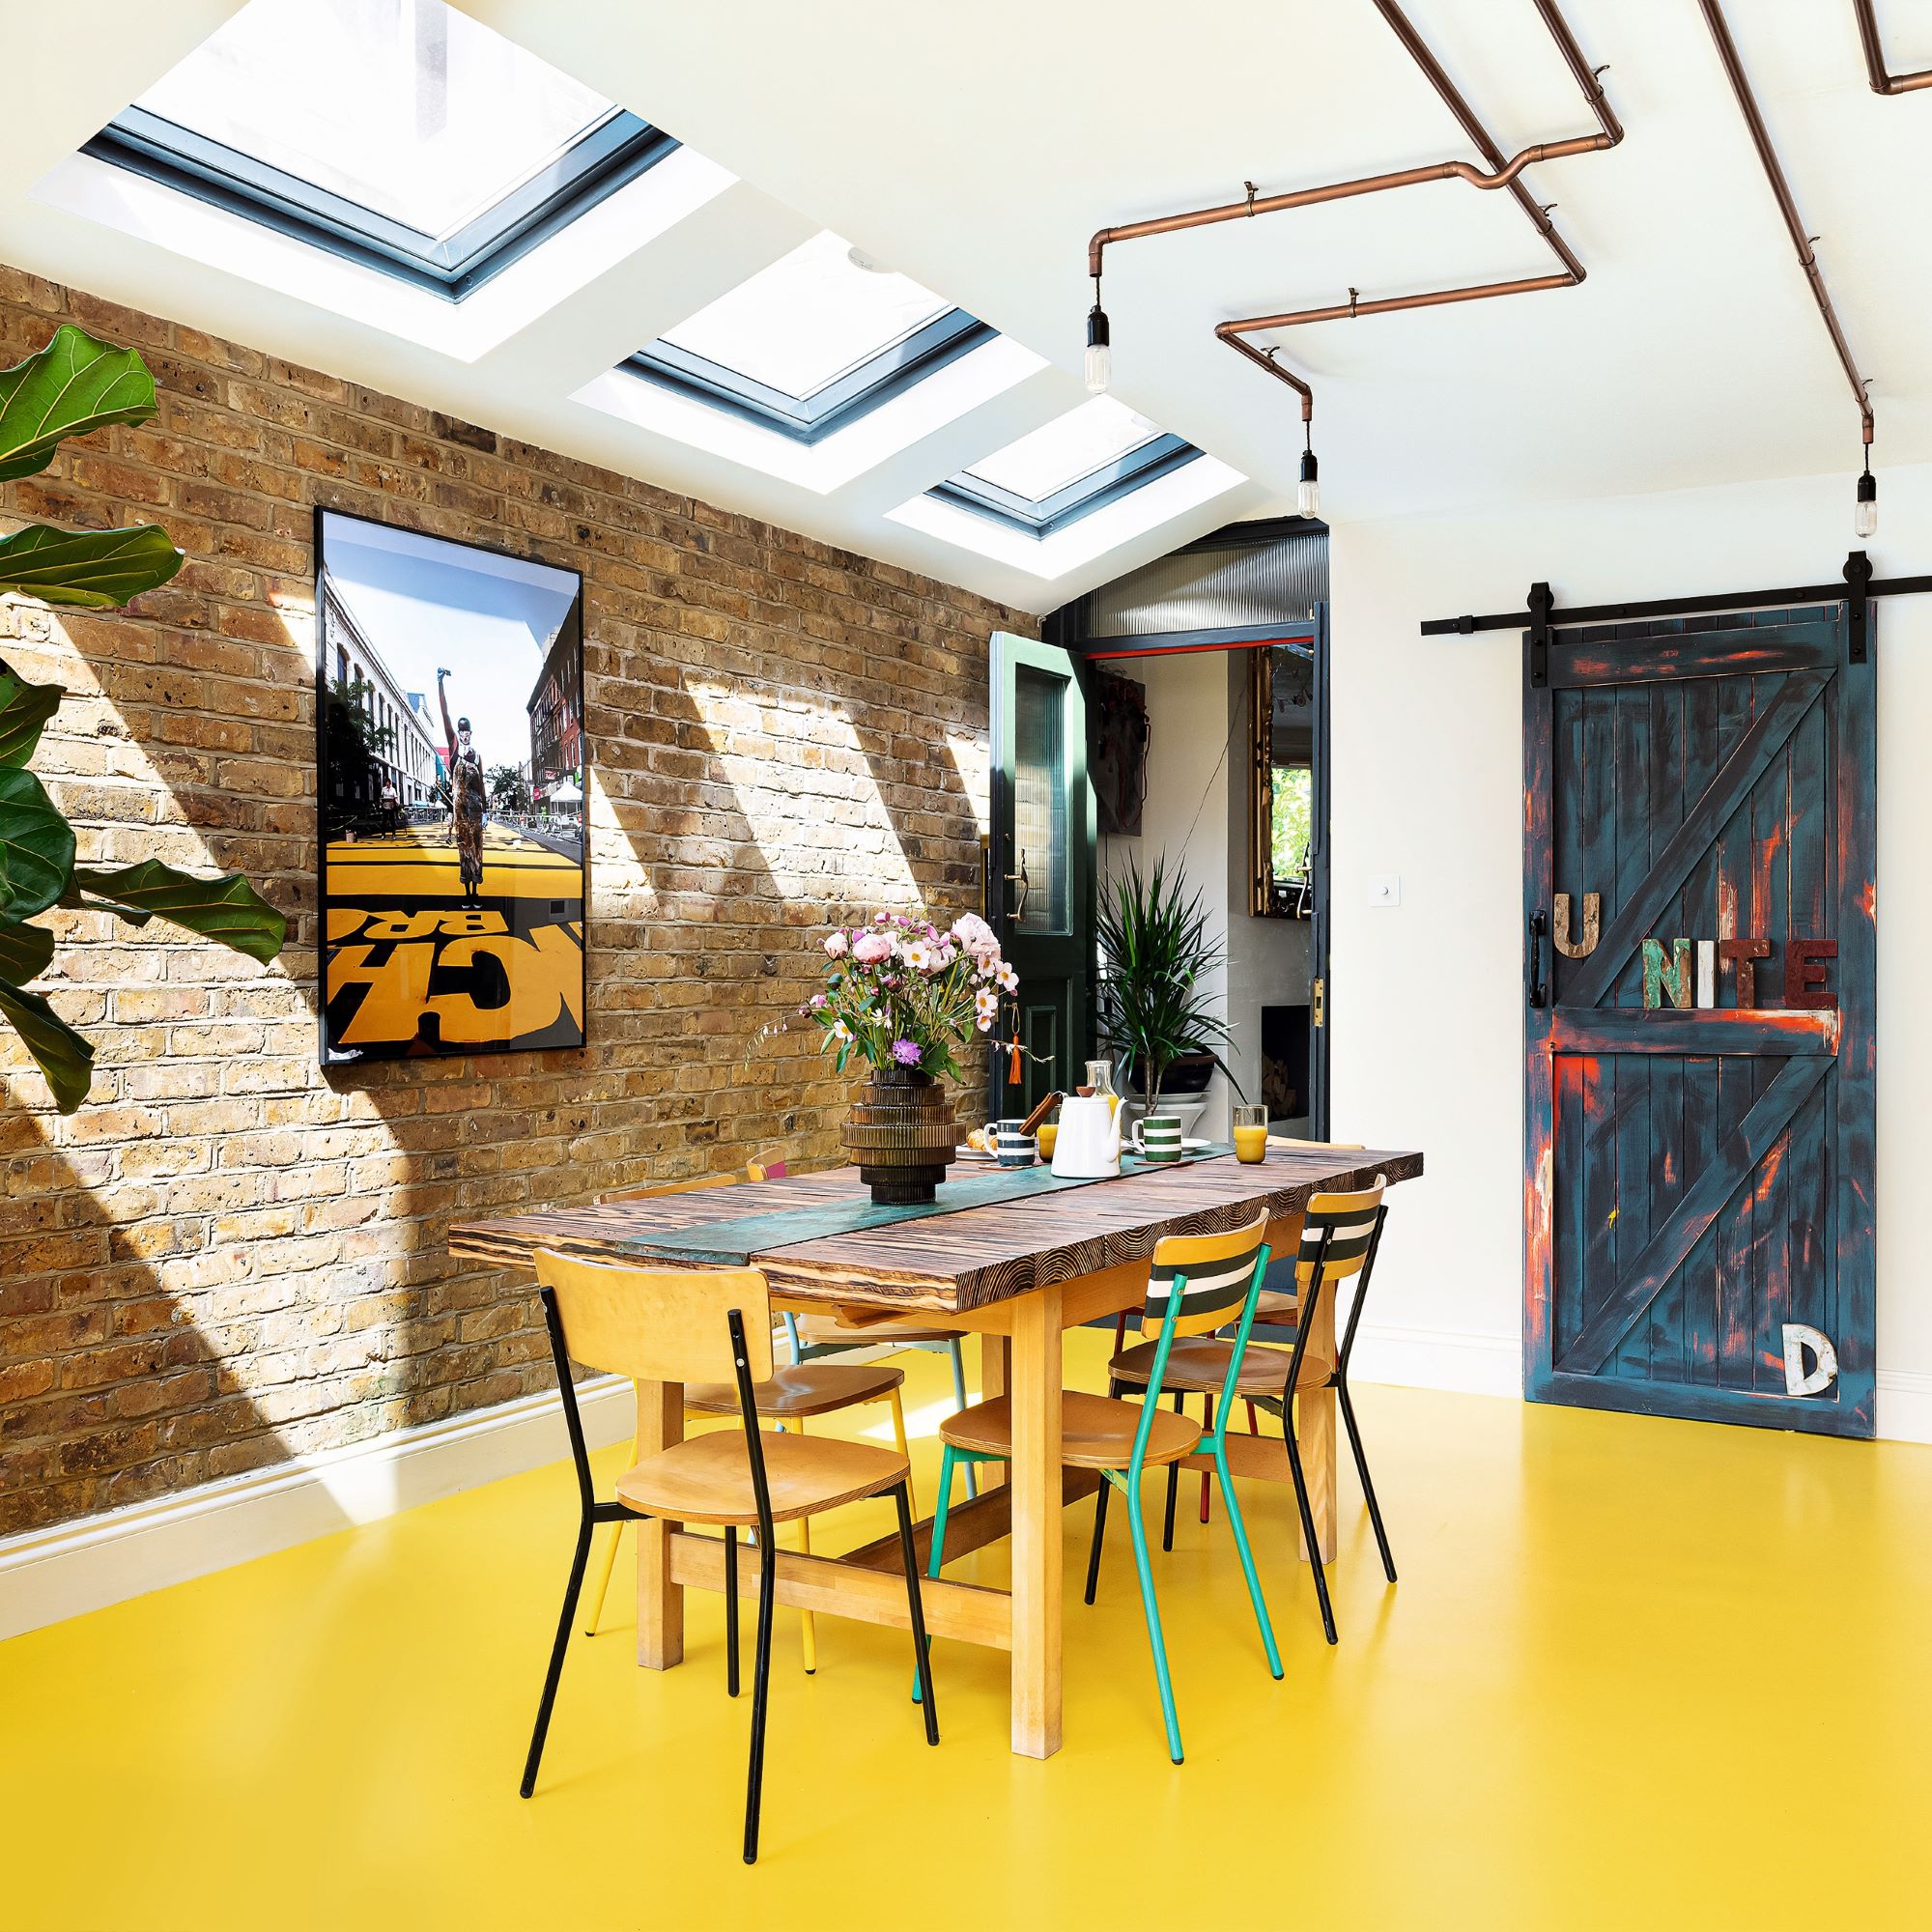 Yellow kitchen floor with brick and white wall under skylight